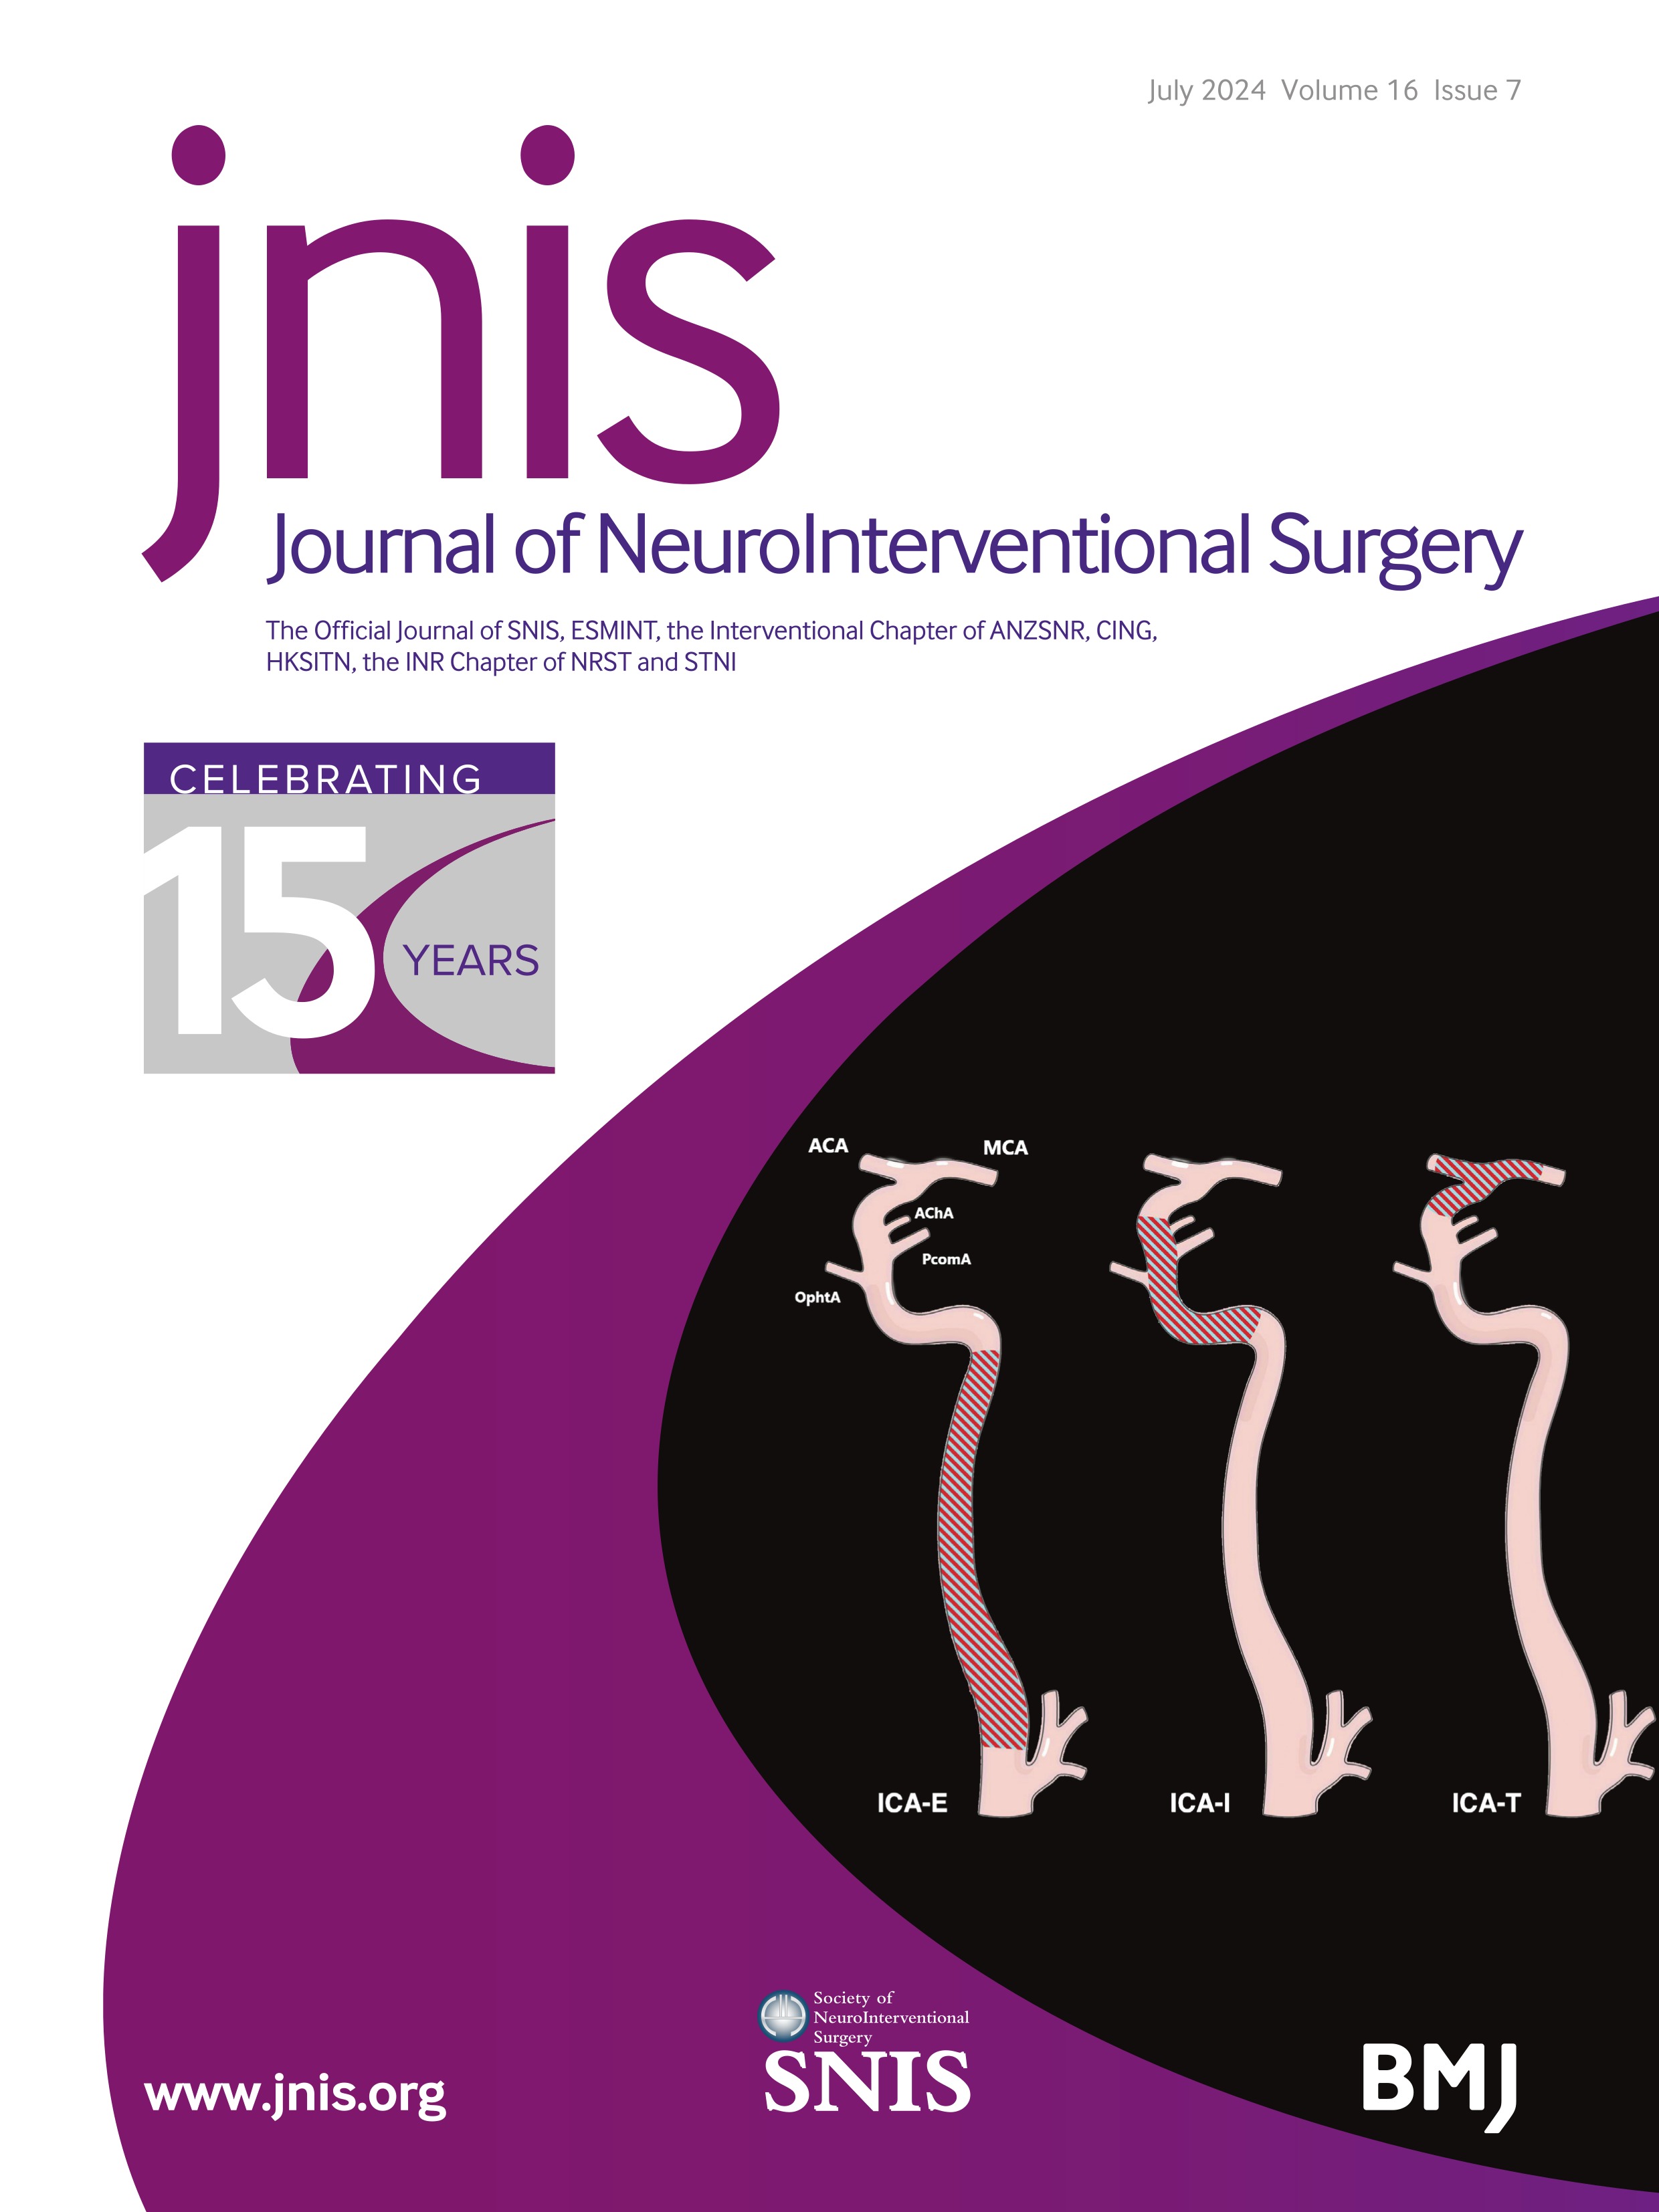 Phenox HPC and Phenox flow modulation devices for the endovascular treatment of intracranial aneurysms: a systematic review and meta-analysis